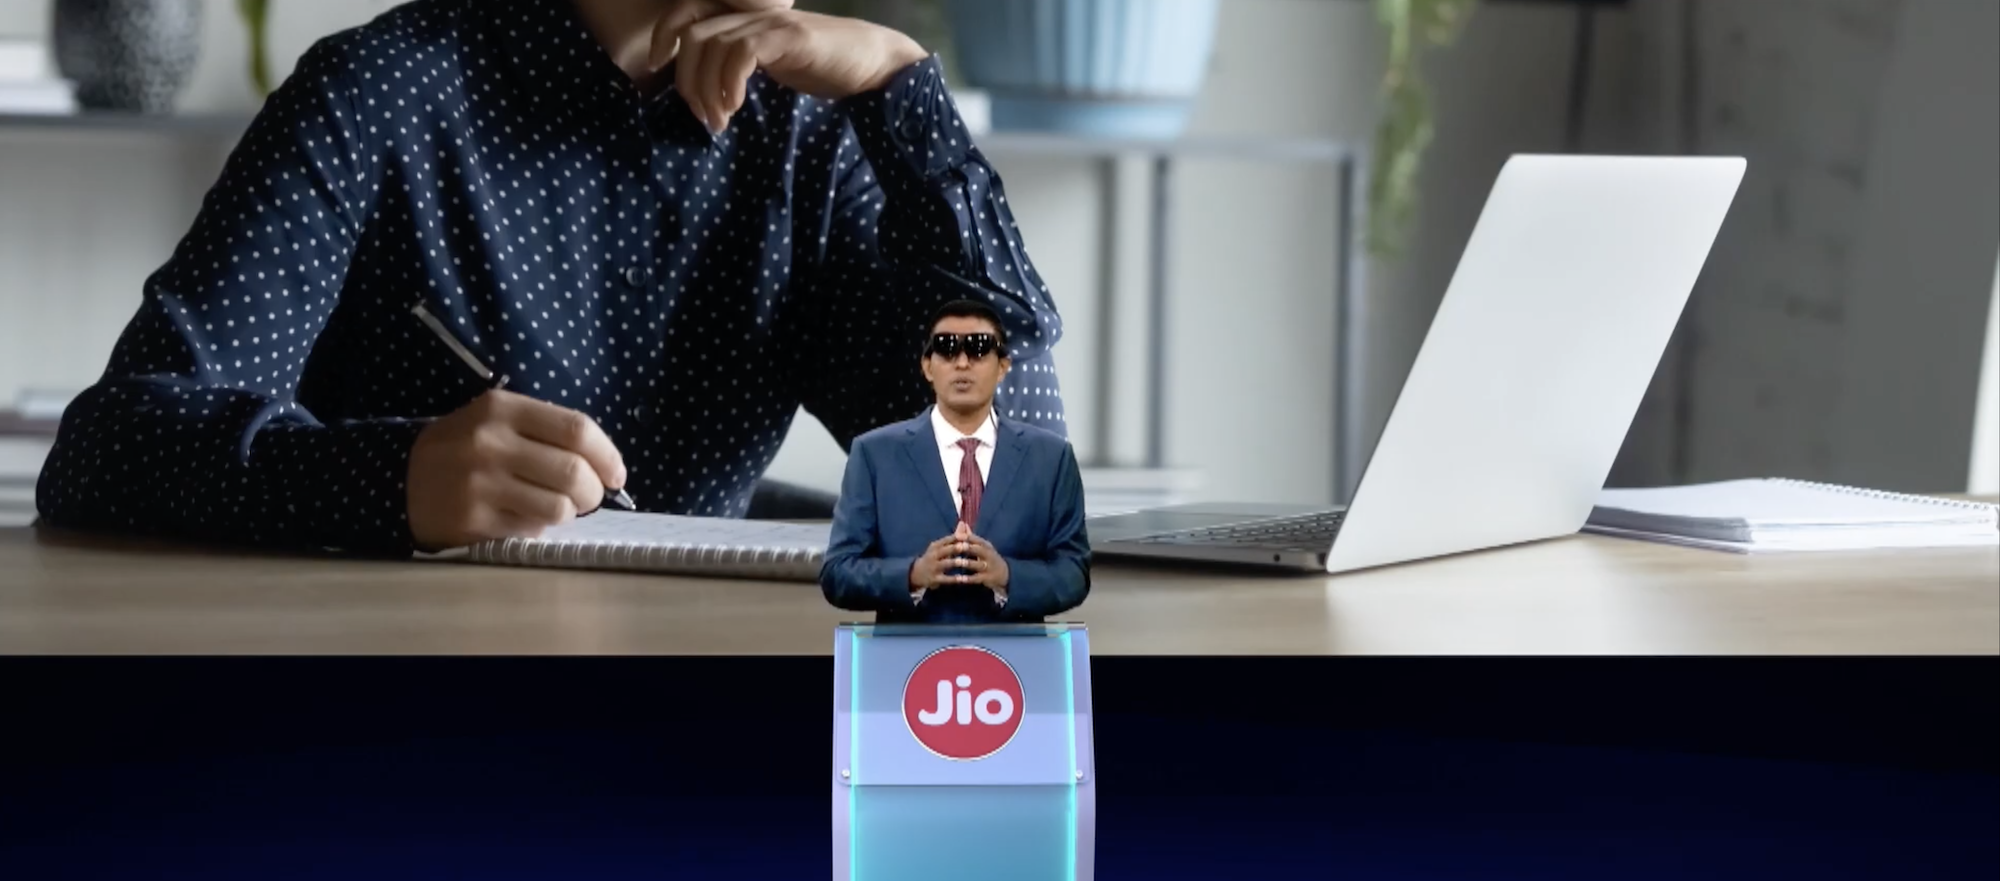 Reliance Company will be surprised to know this Jio Glass feature launched